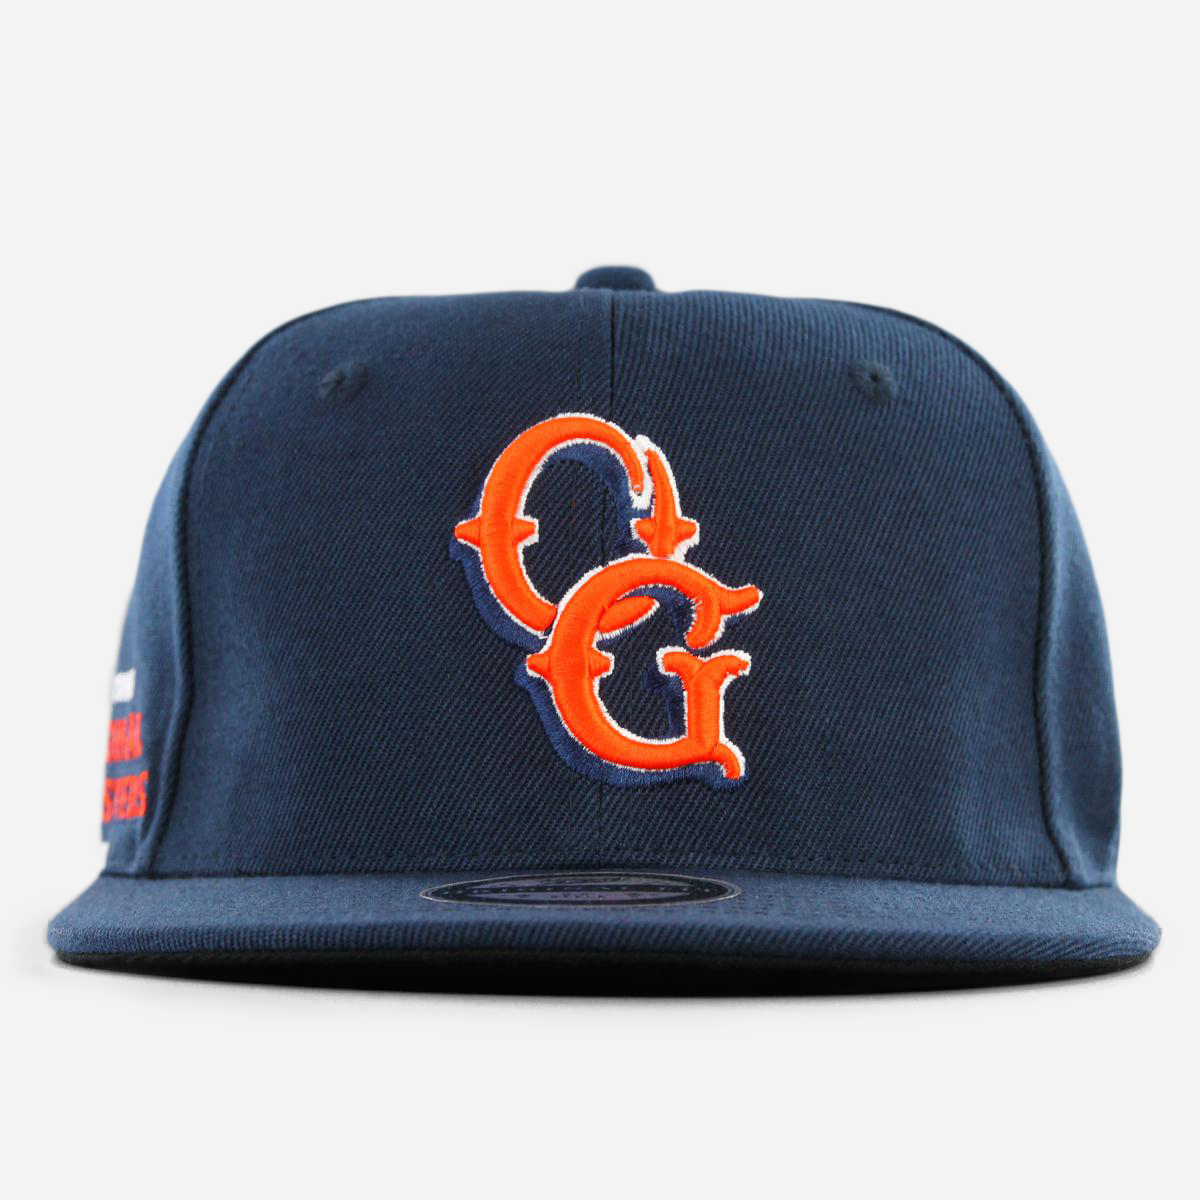 South Central Original Gangsters fitted navy/orange